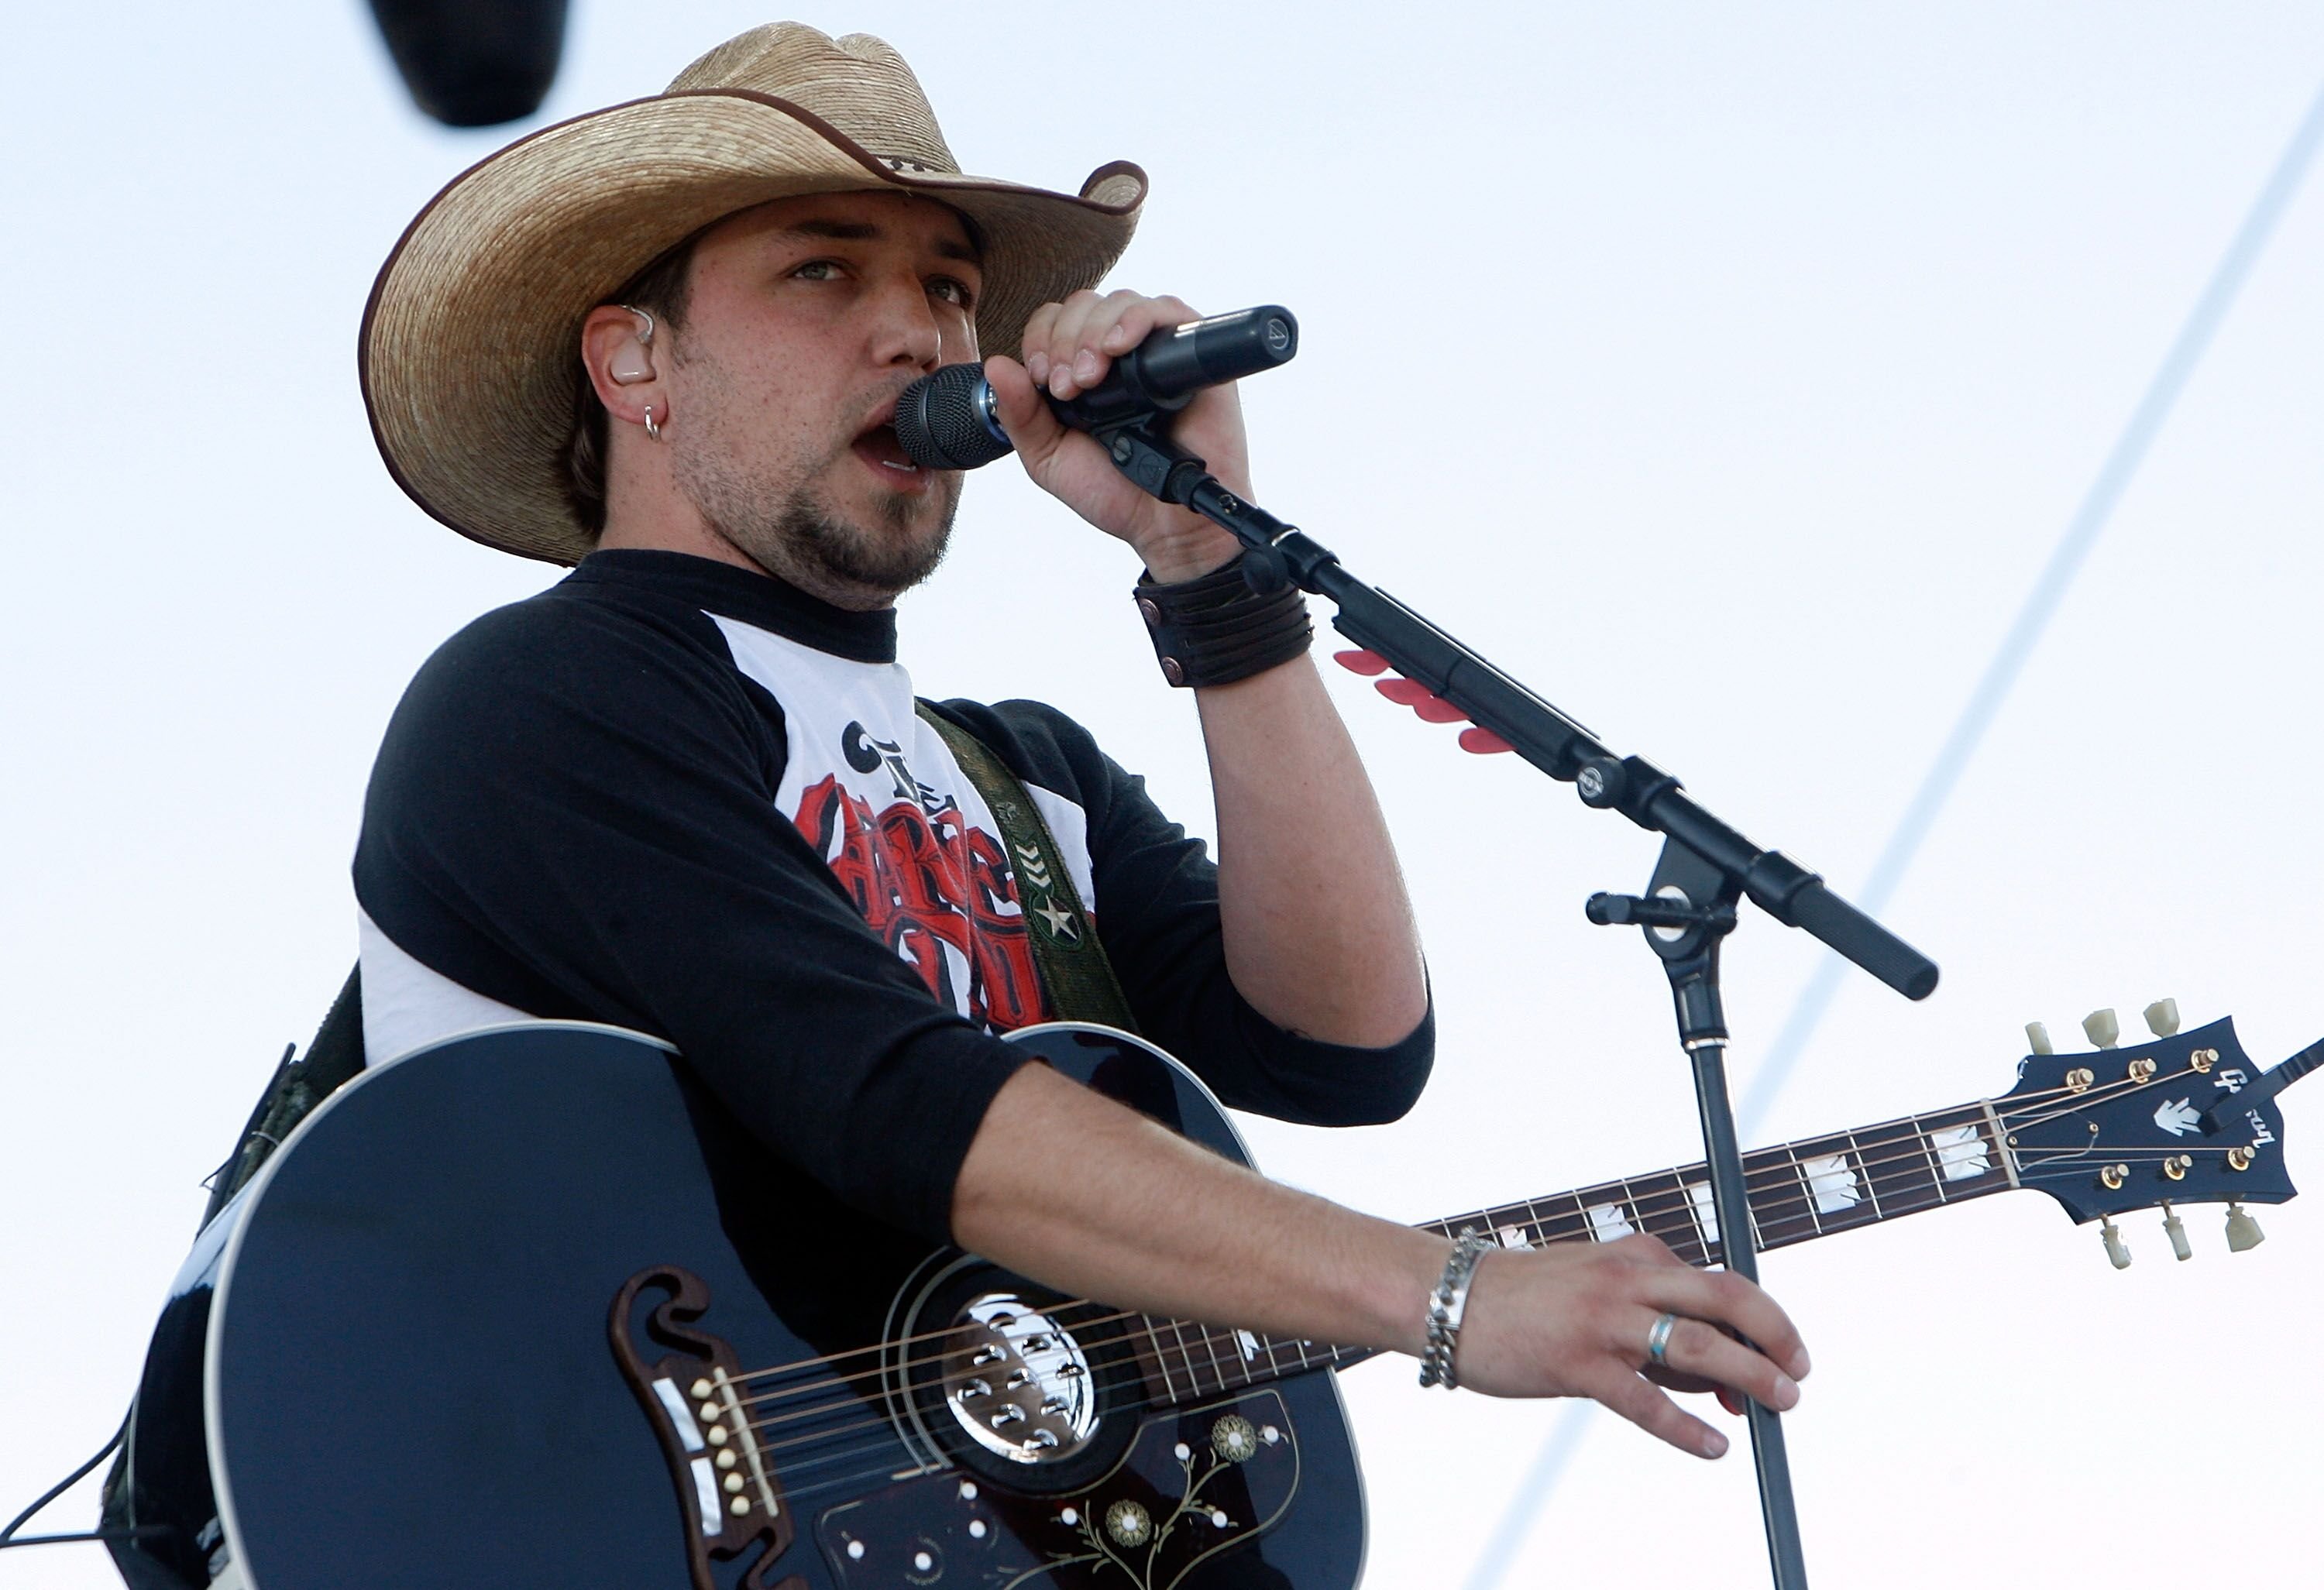 Jason Aldean performs during the Stagecoach Music Festival held at the Empire Polo Field on May 6, 2007, in Indio, California | Photo: Kevin Winter/Getty Images